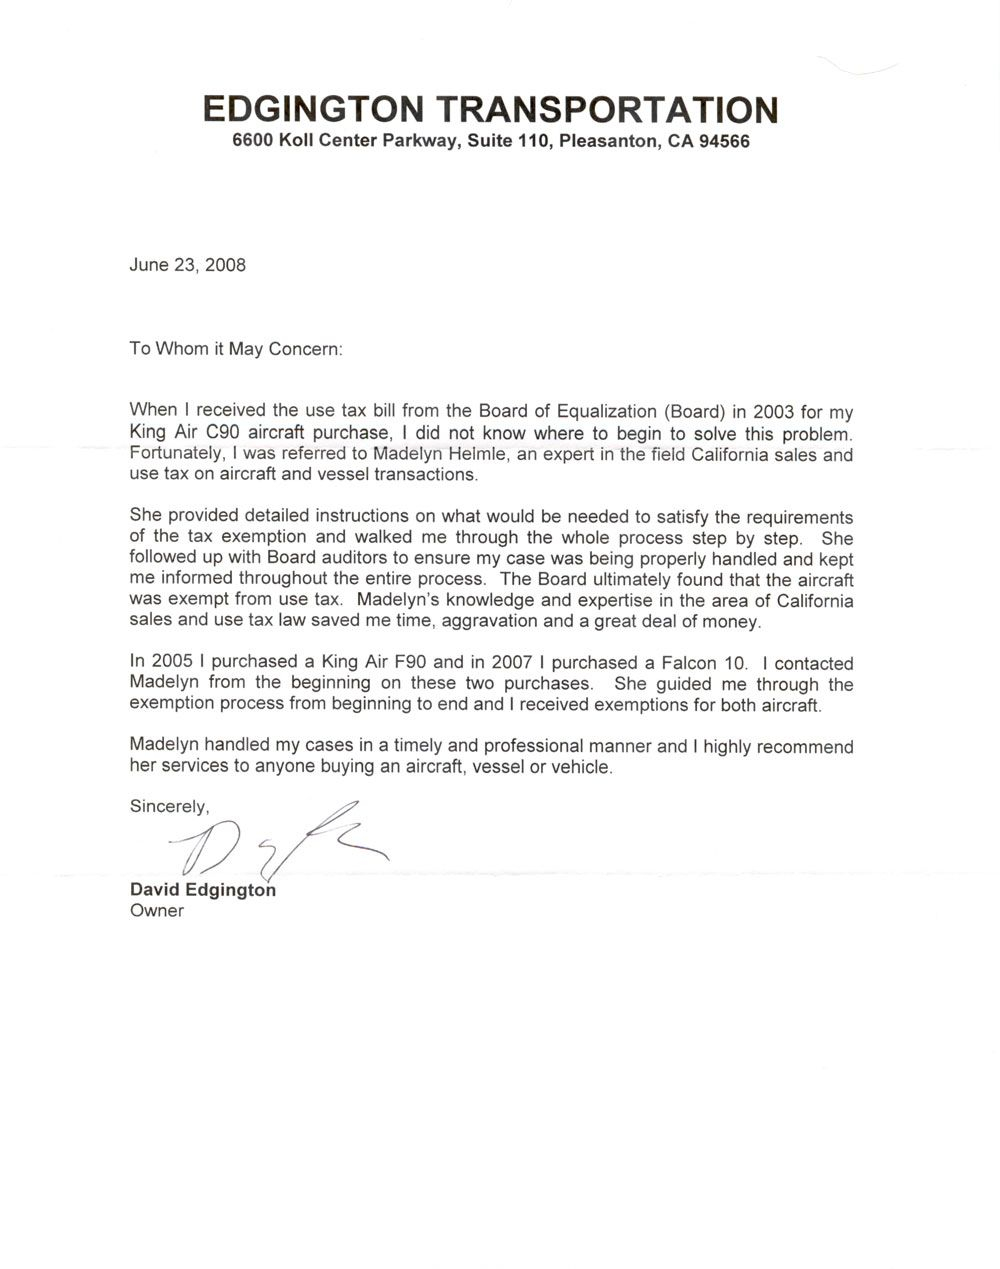 Reference Letter With Images Reference Letter within size 1000 X 1269